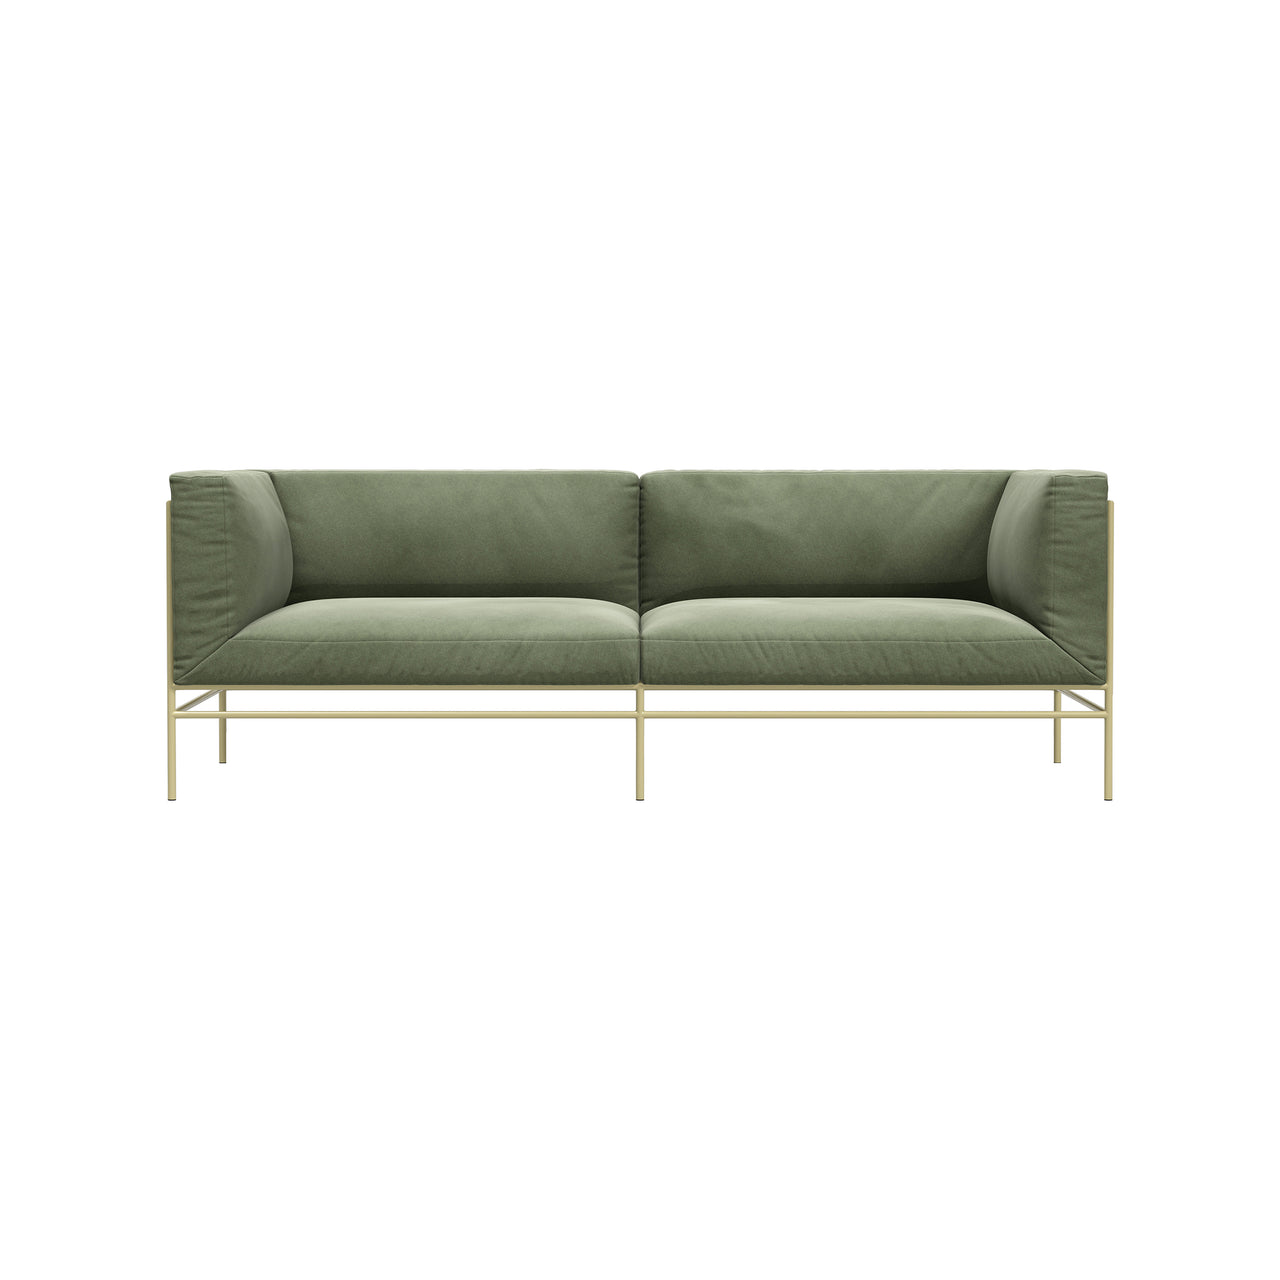 Middleweight Sofa: 2 + Champagne